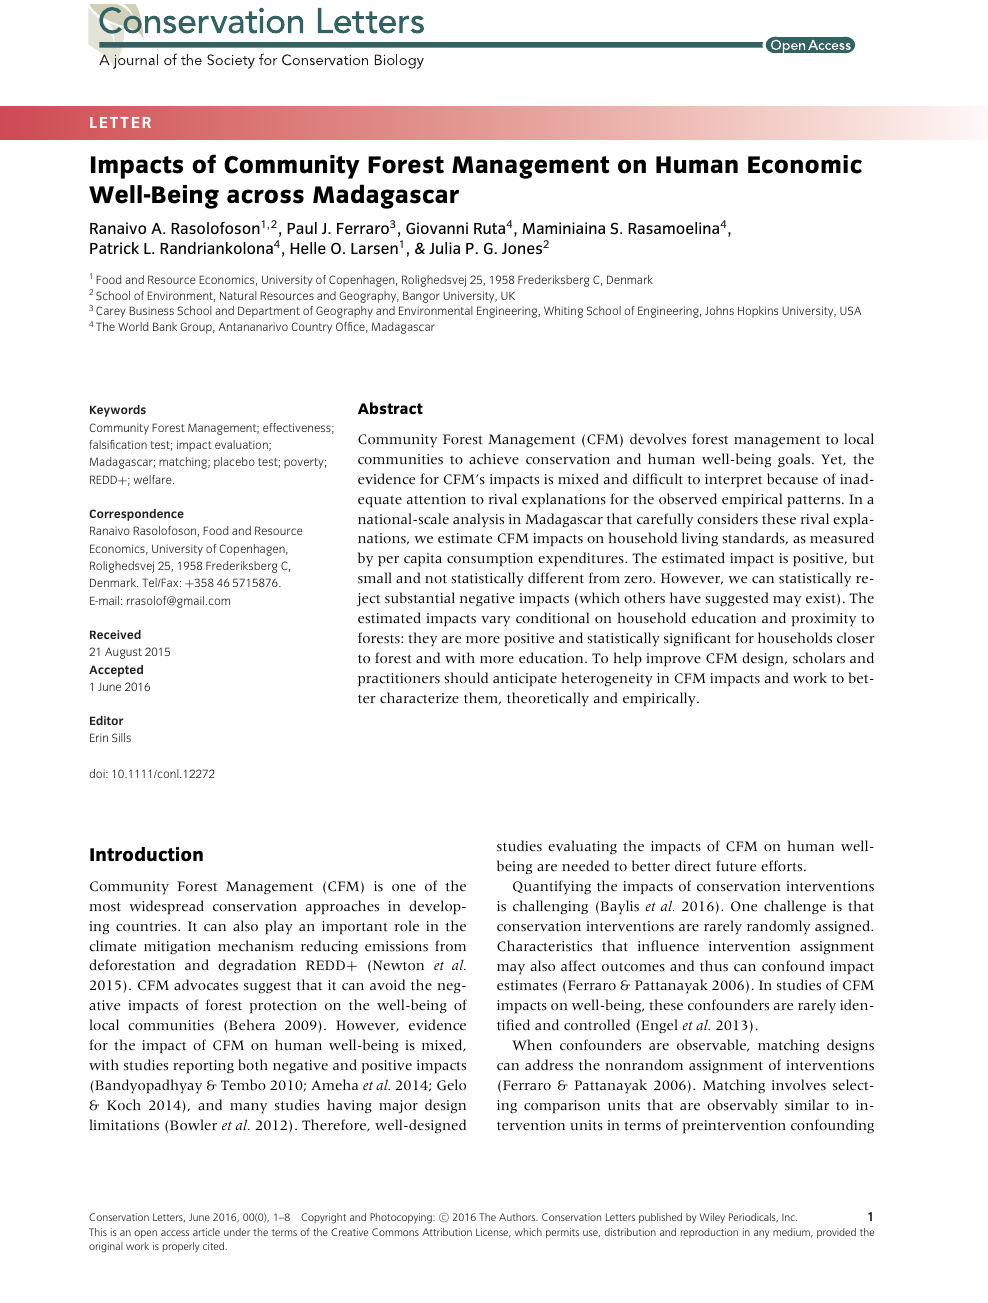 Impacts of Community Forest Management on Human Economic Well-Being across Madagascar – topic of research paper in Earth and related environmental sciences. Download scholarly article PDF and on CyberLeninka